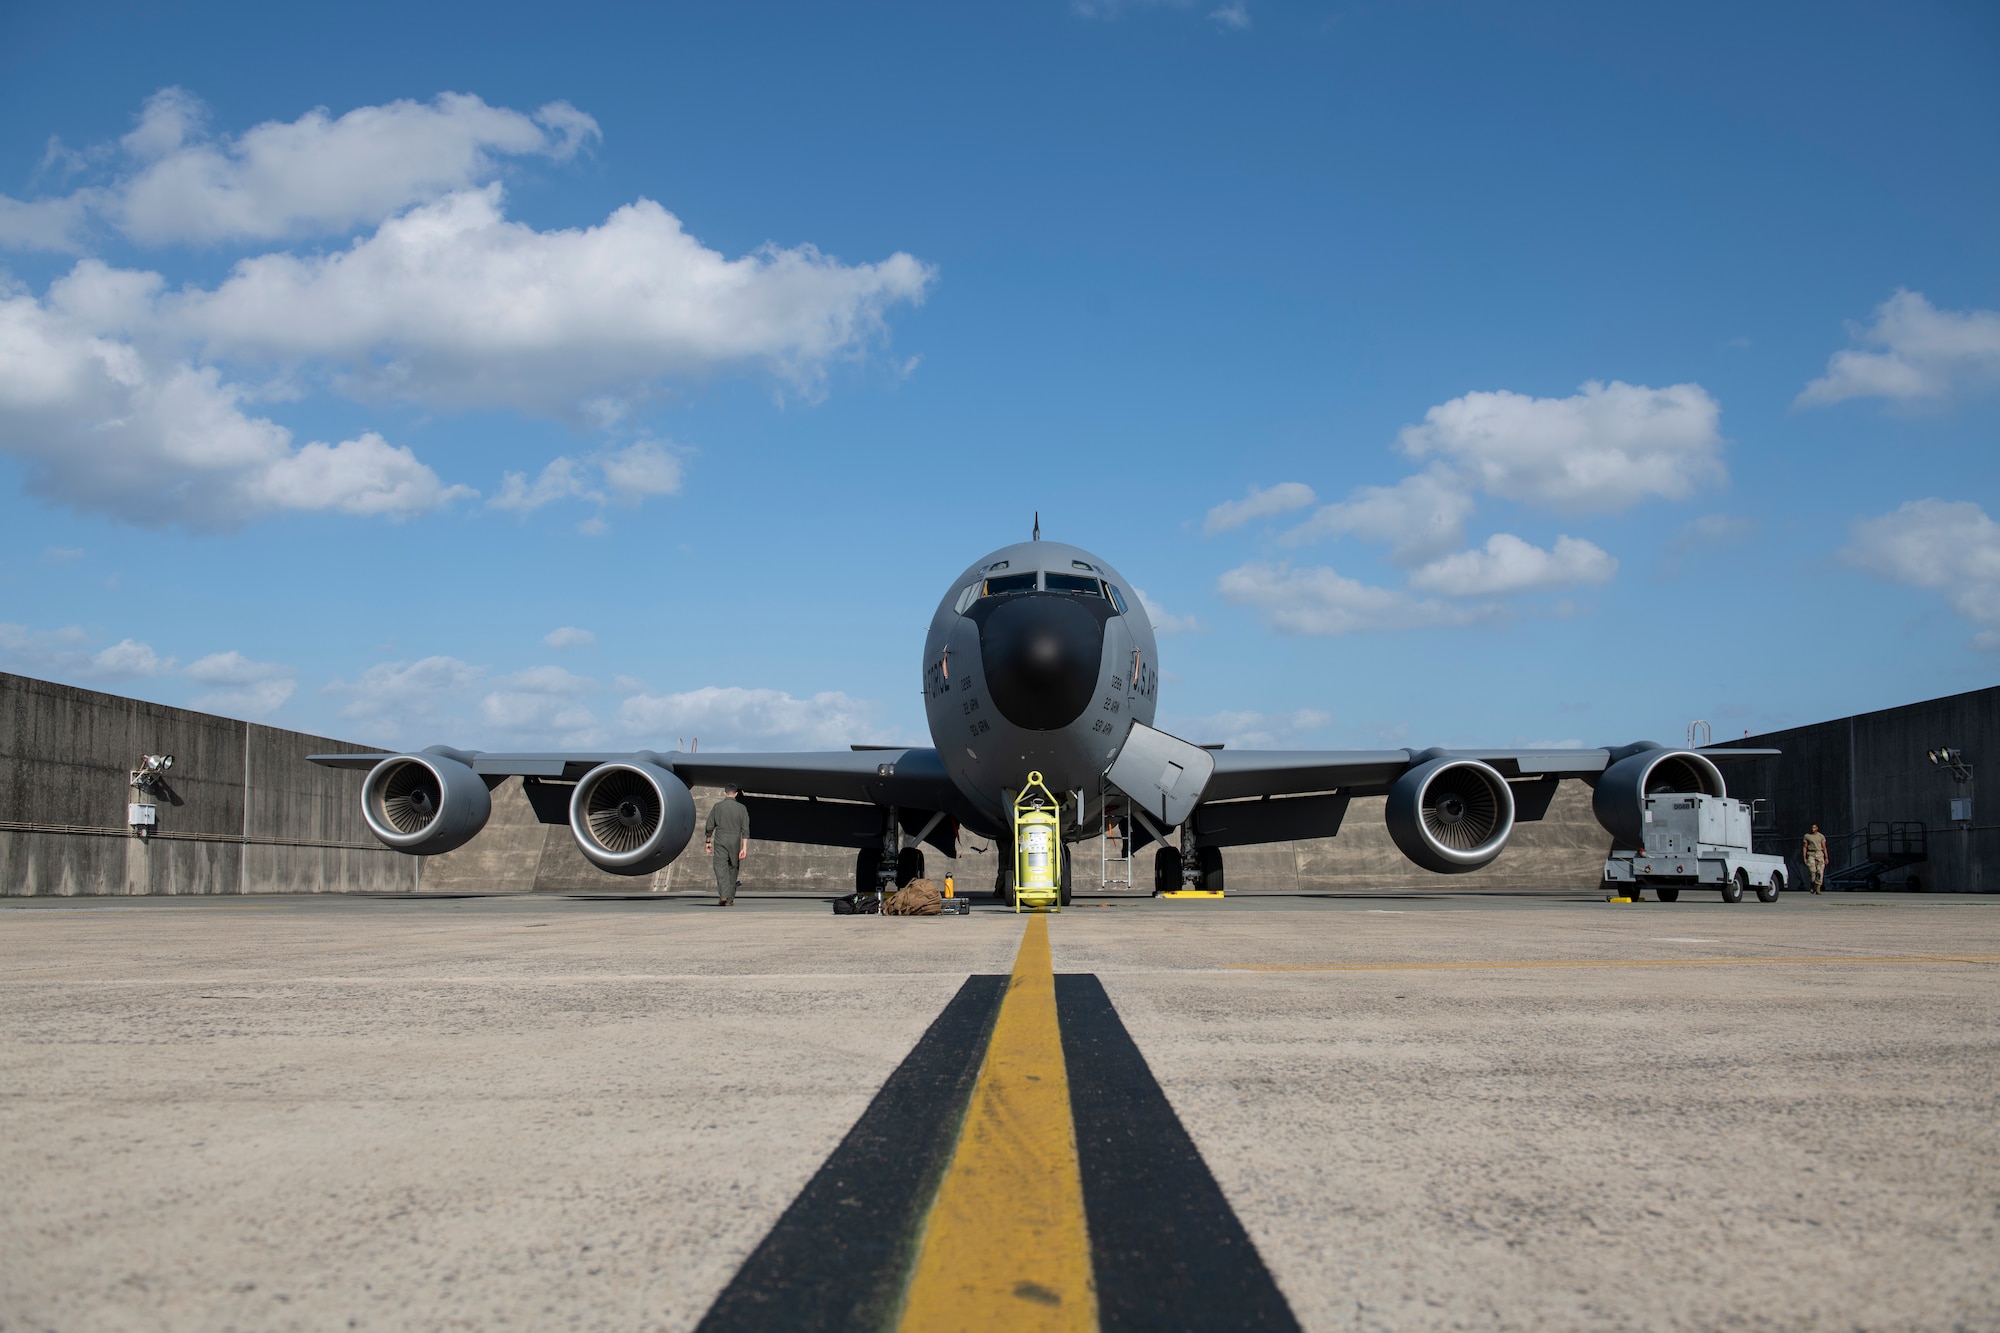 A KC-135 Stratotanker assigned to the 909th Air Refueling Squadron is parked on the flightline prior to flight in support of a joint training exercise over the Pacific Ocean, Oct. 24, 2022. Joint training strengthens partnerships and enhances capabilities, allowing the U.S. to maintain air supremacy and ensure a free and open Indo-Pacific. (U.S. Air Force photo by Senior Airman Jessi Roth)